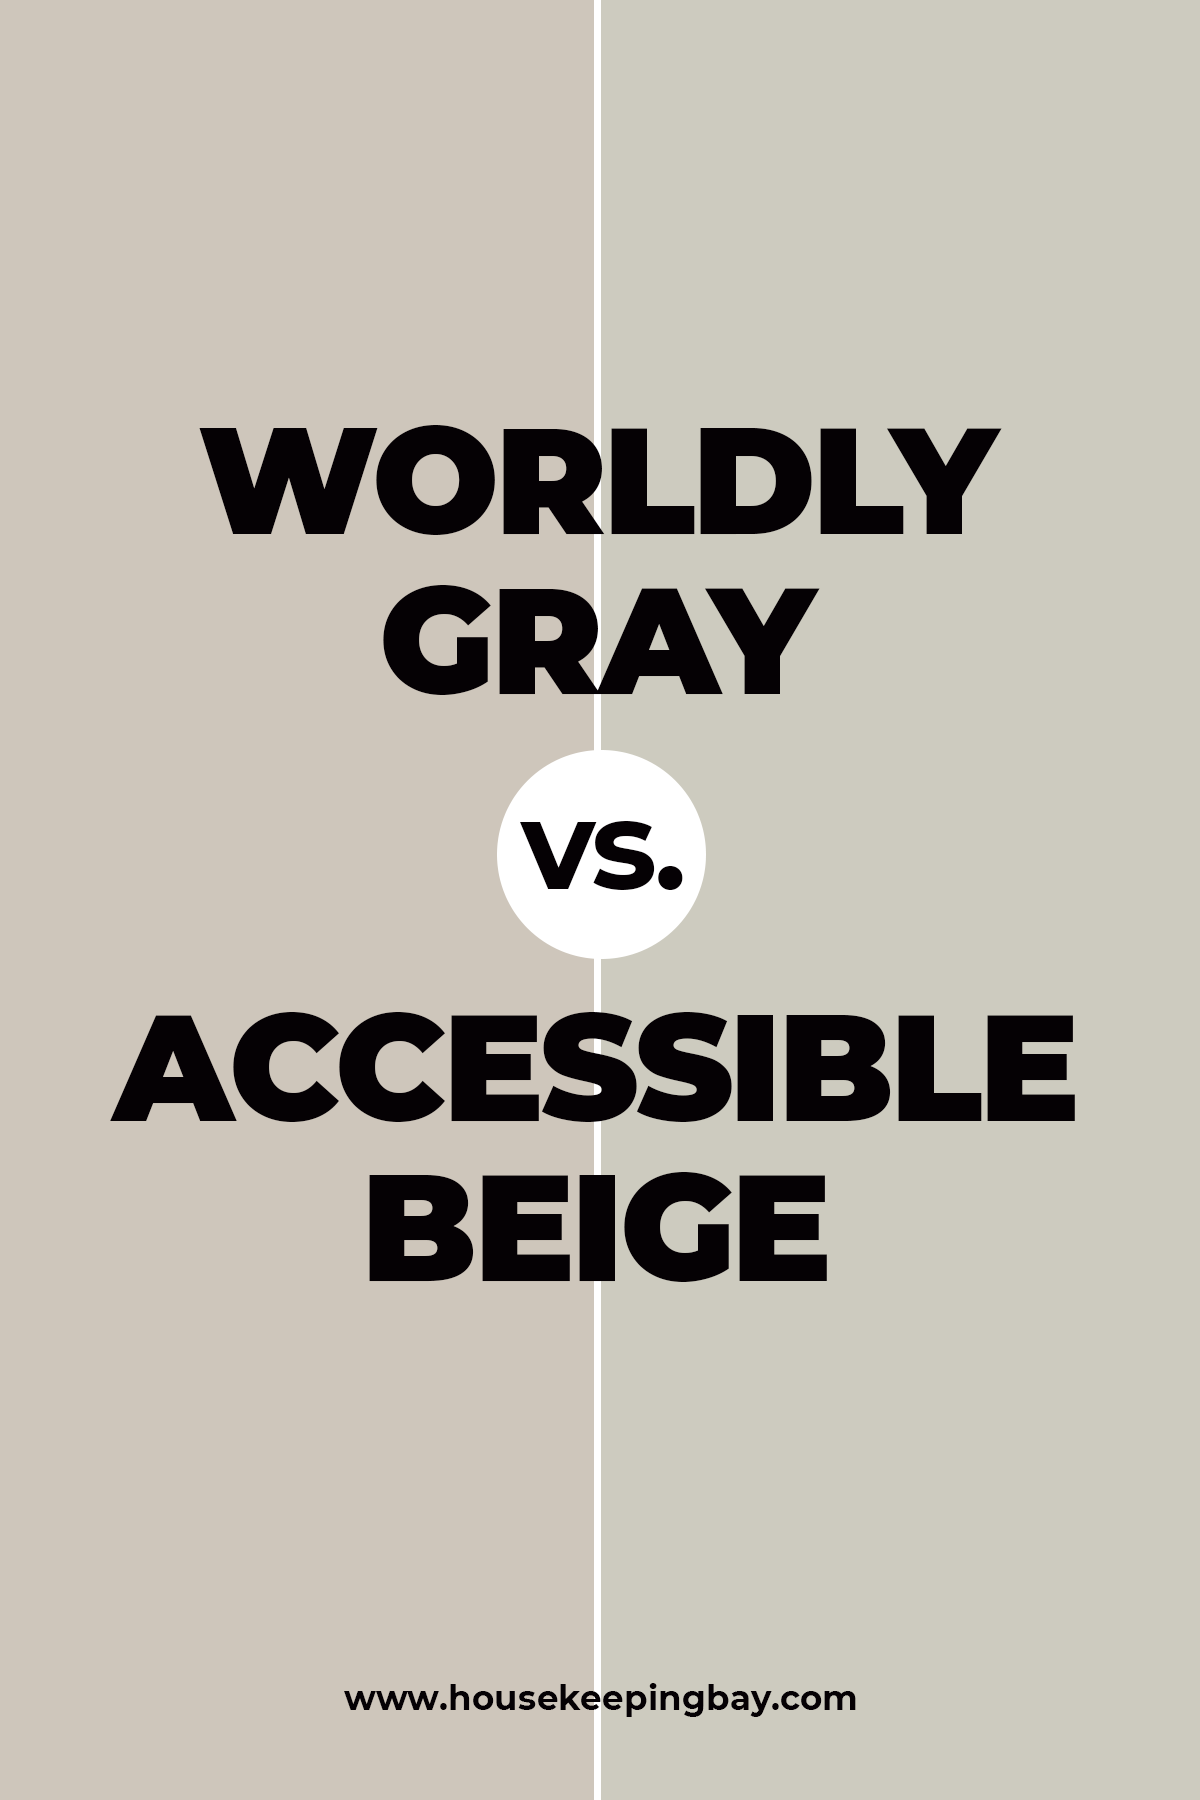 Worldly Gray vs. Accessible Beige